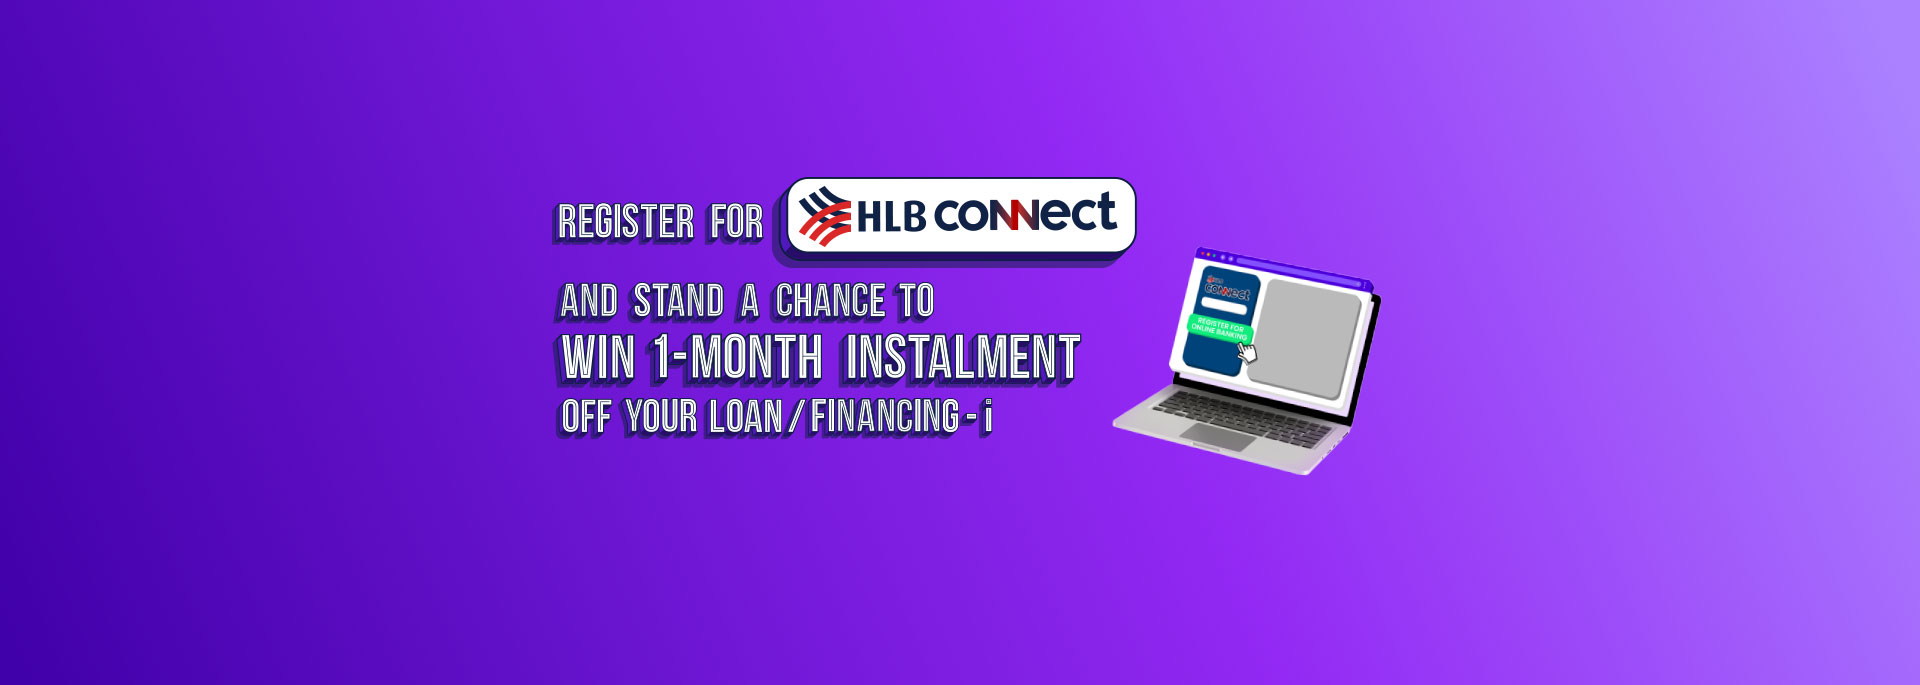 Register for HLB Connect and stand a chance to win 1-month instalment off your loan/financing-i